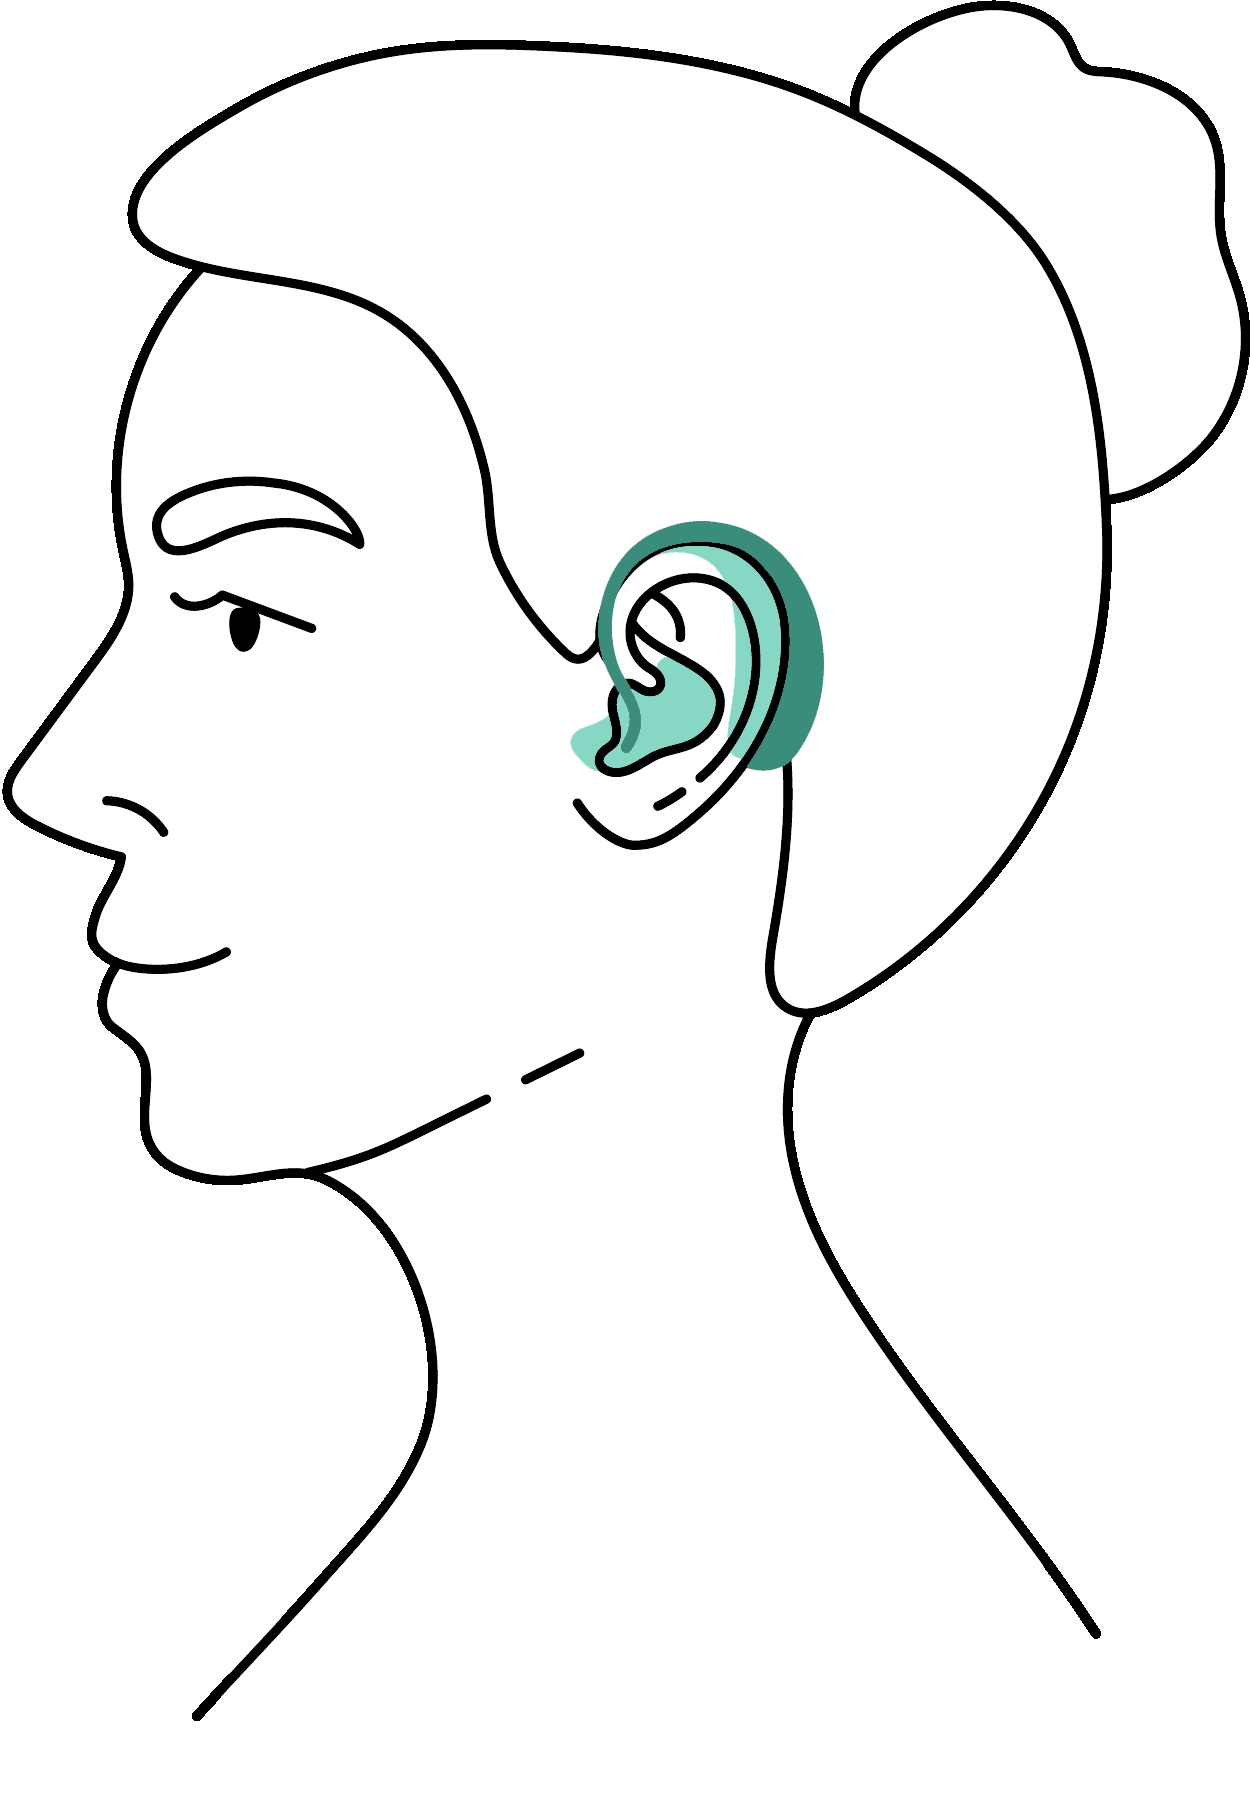 Receiver in Ear (RIC)